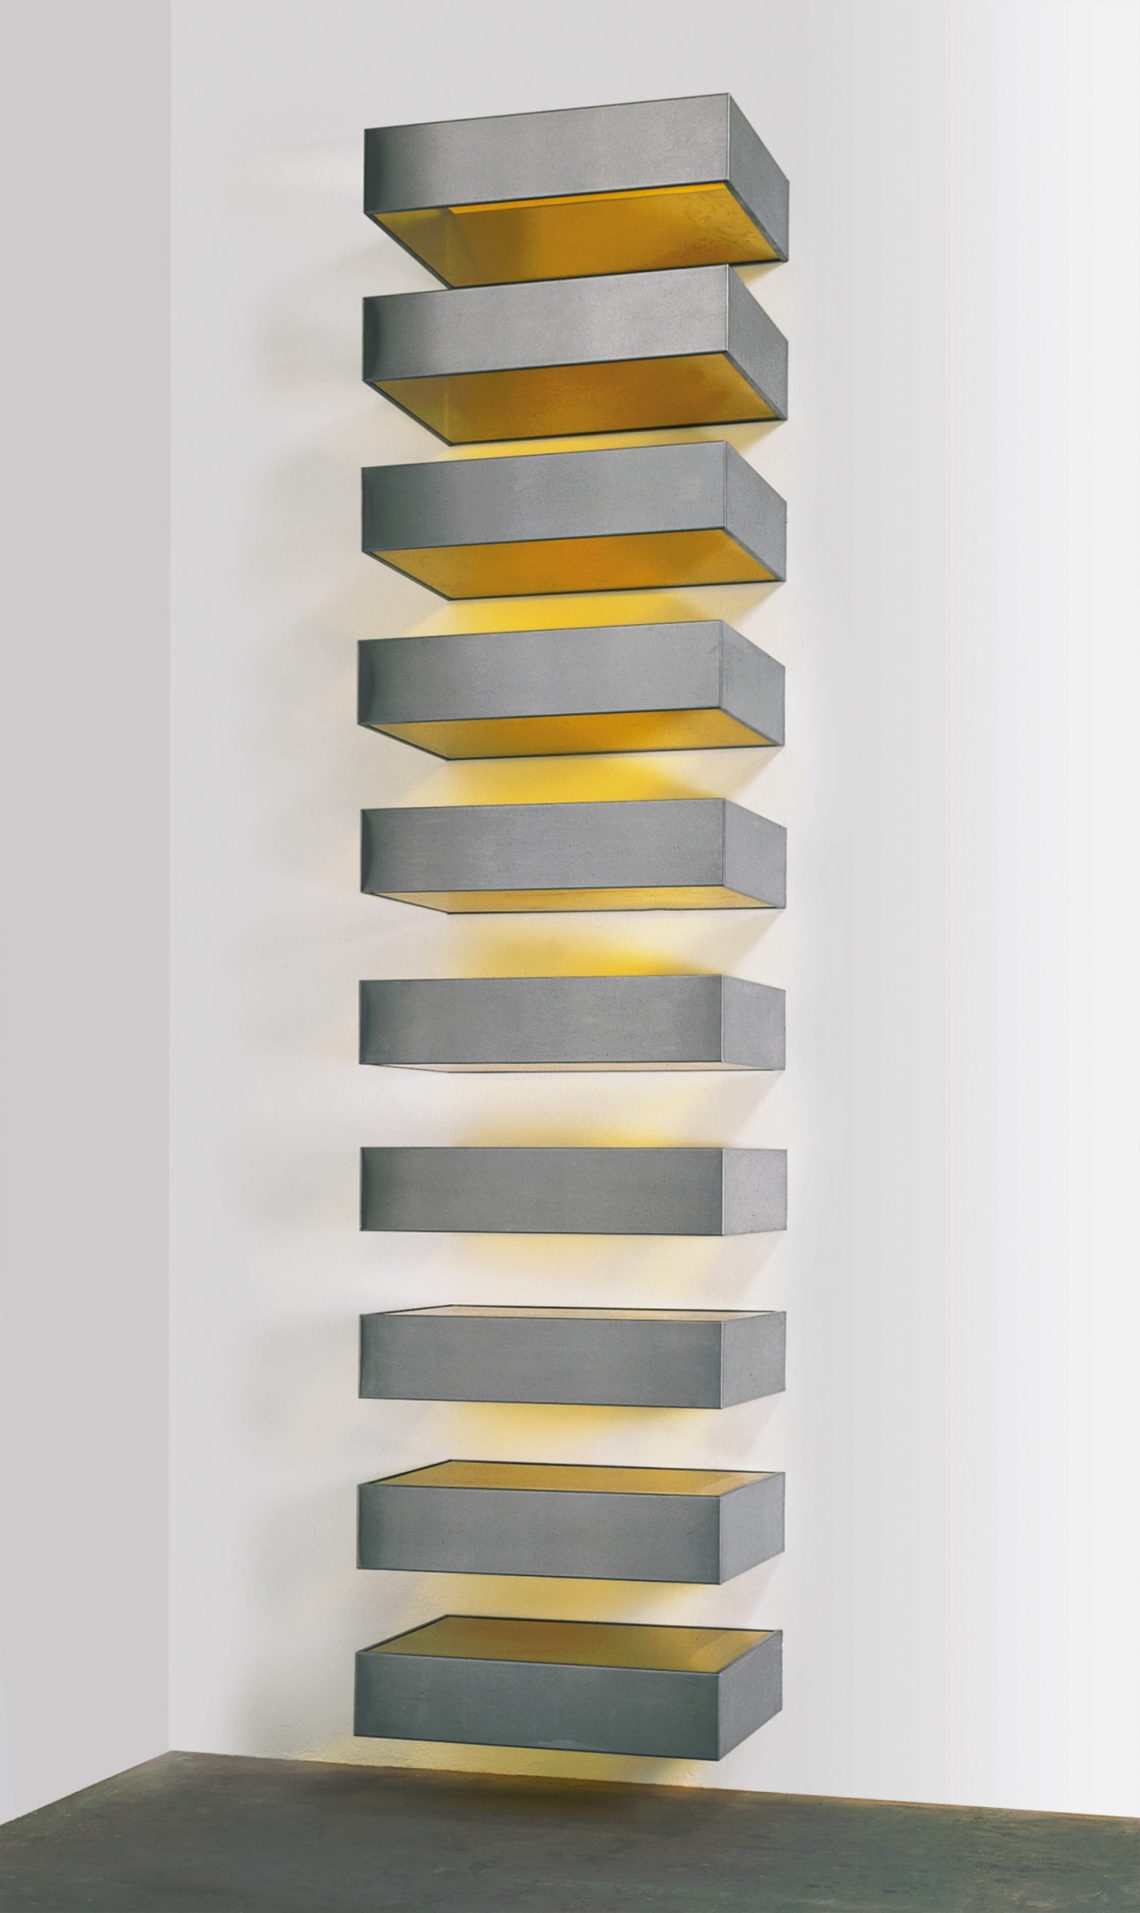 Untitled (DSS 123), stainless steel and plexiglass, 1968; by Donald Judd